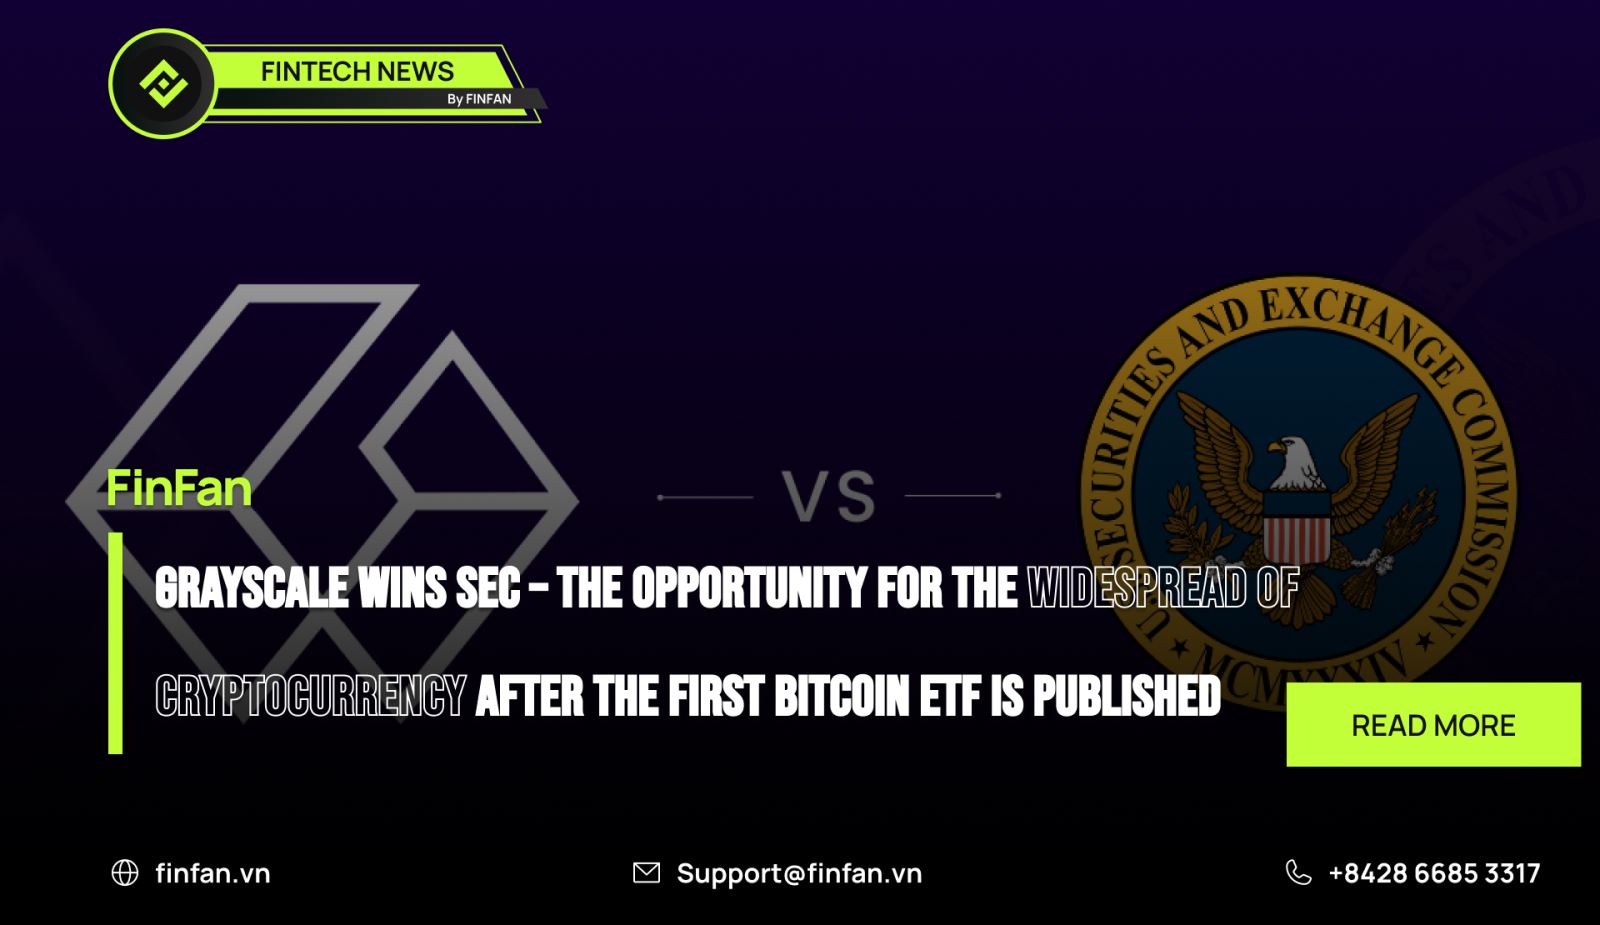 Grayscale wins SEC – The opportunity for the widespread of cryptocurrency after the first Bitcoin ETF is published